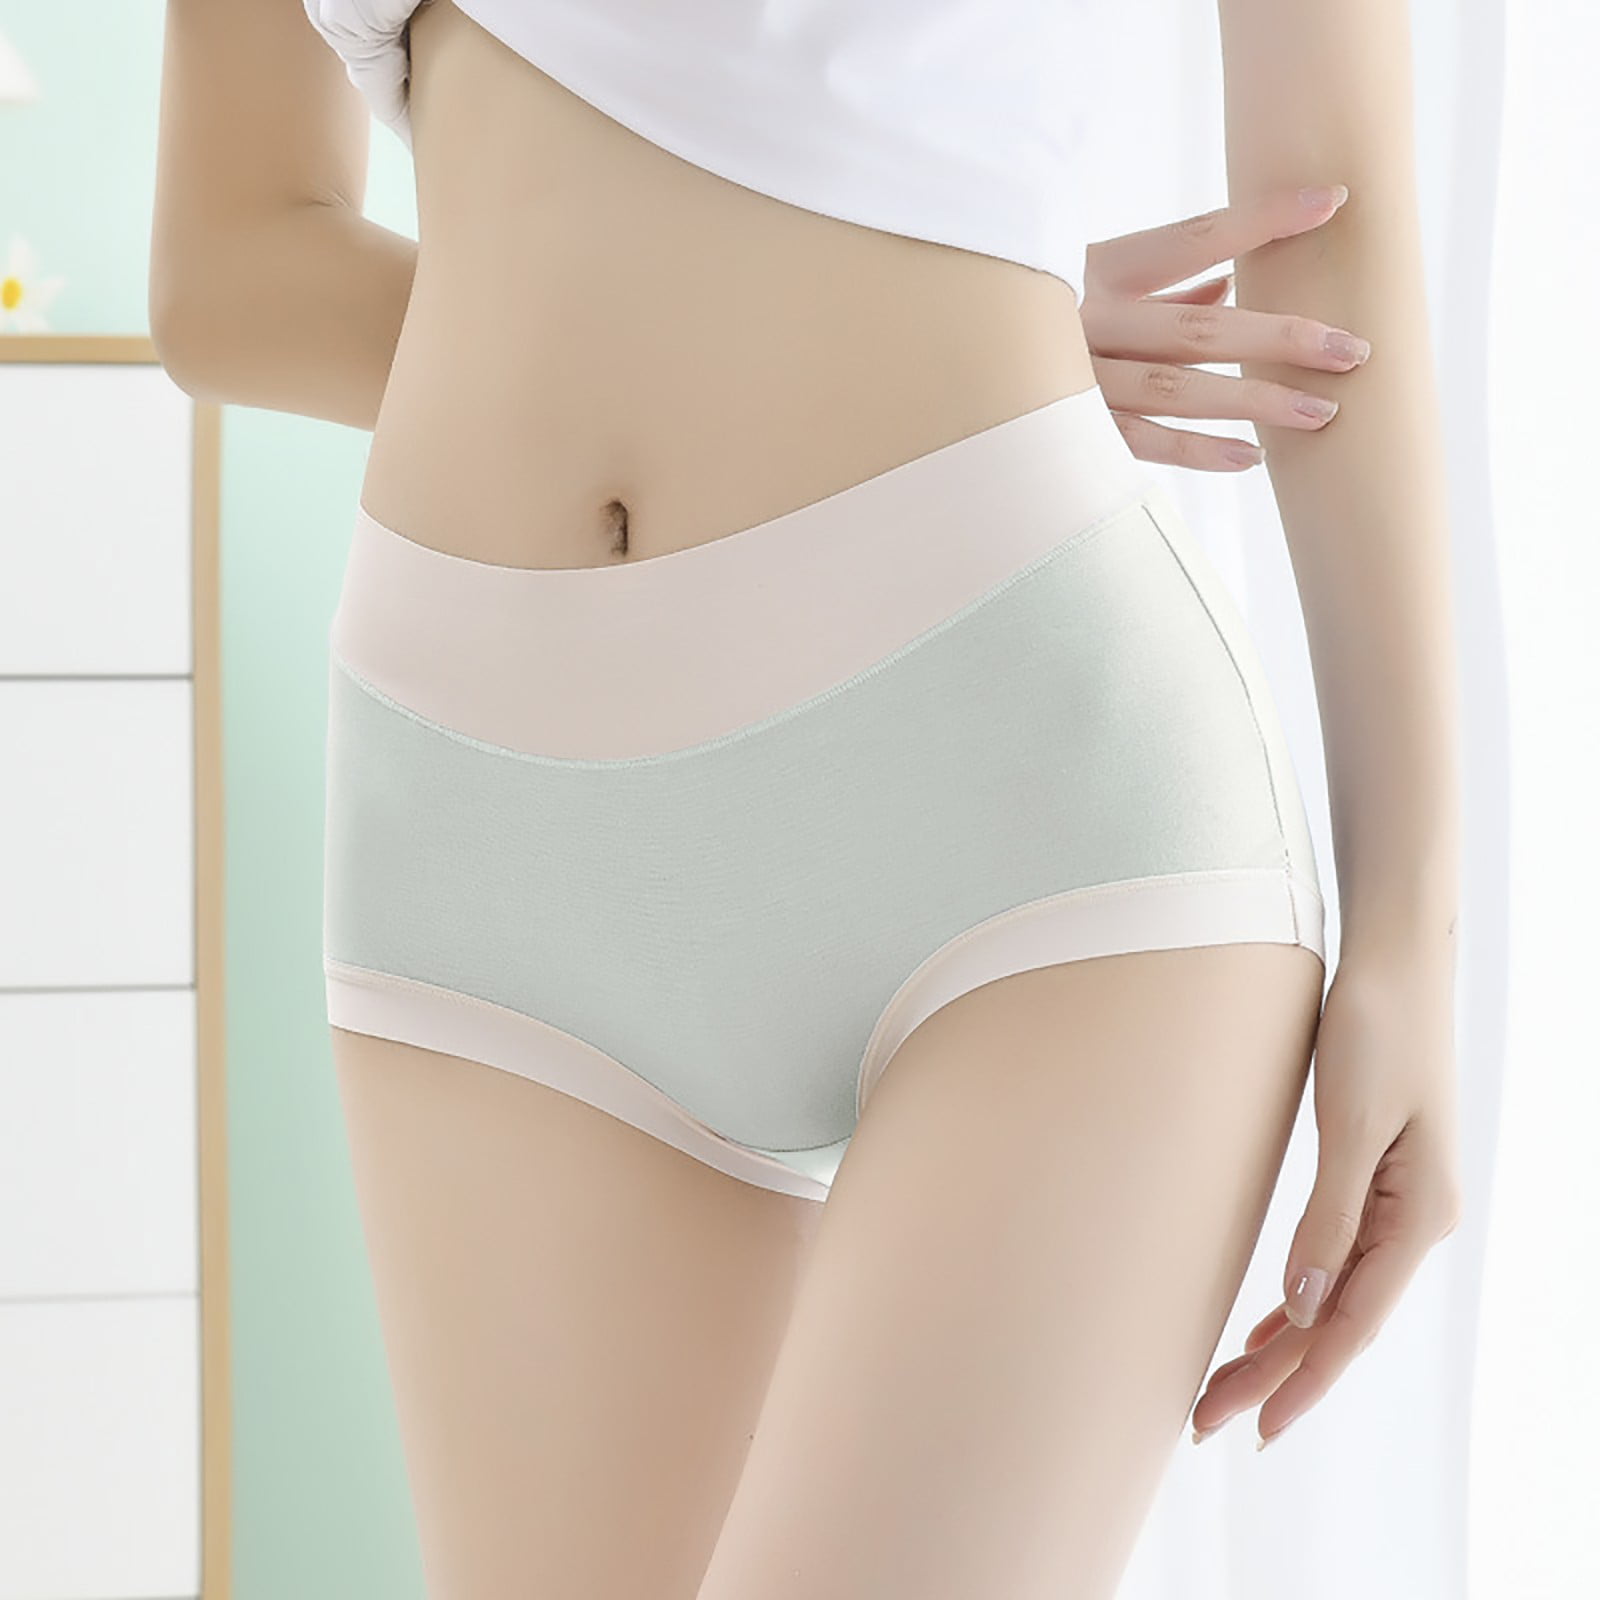  HELLOVE Womens Mesh Period Panties Menstrual Leak Proof  Underwear Incontinence Protective Briefs (H-4-5-1, Large) : Health &  Household